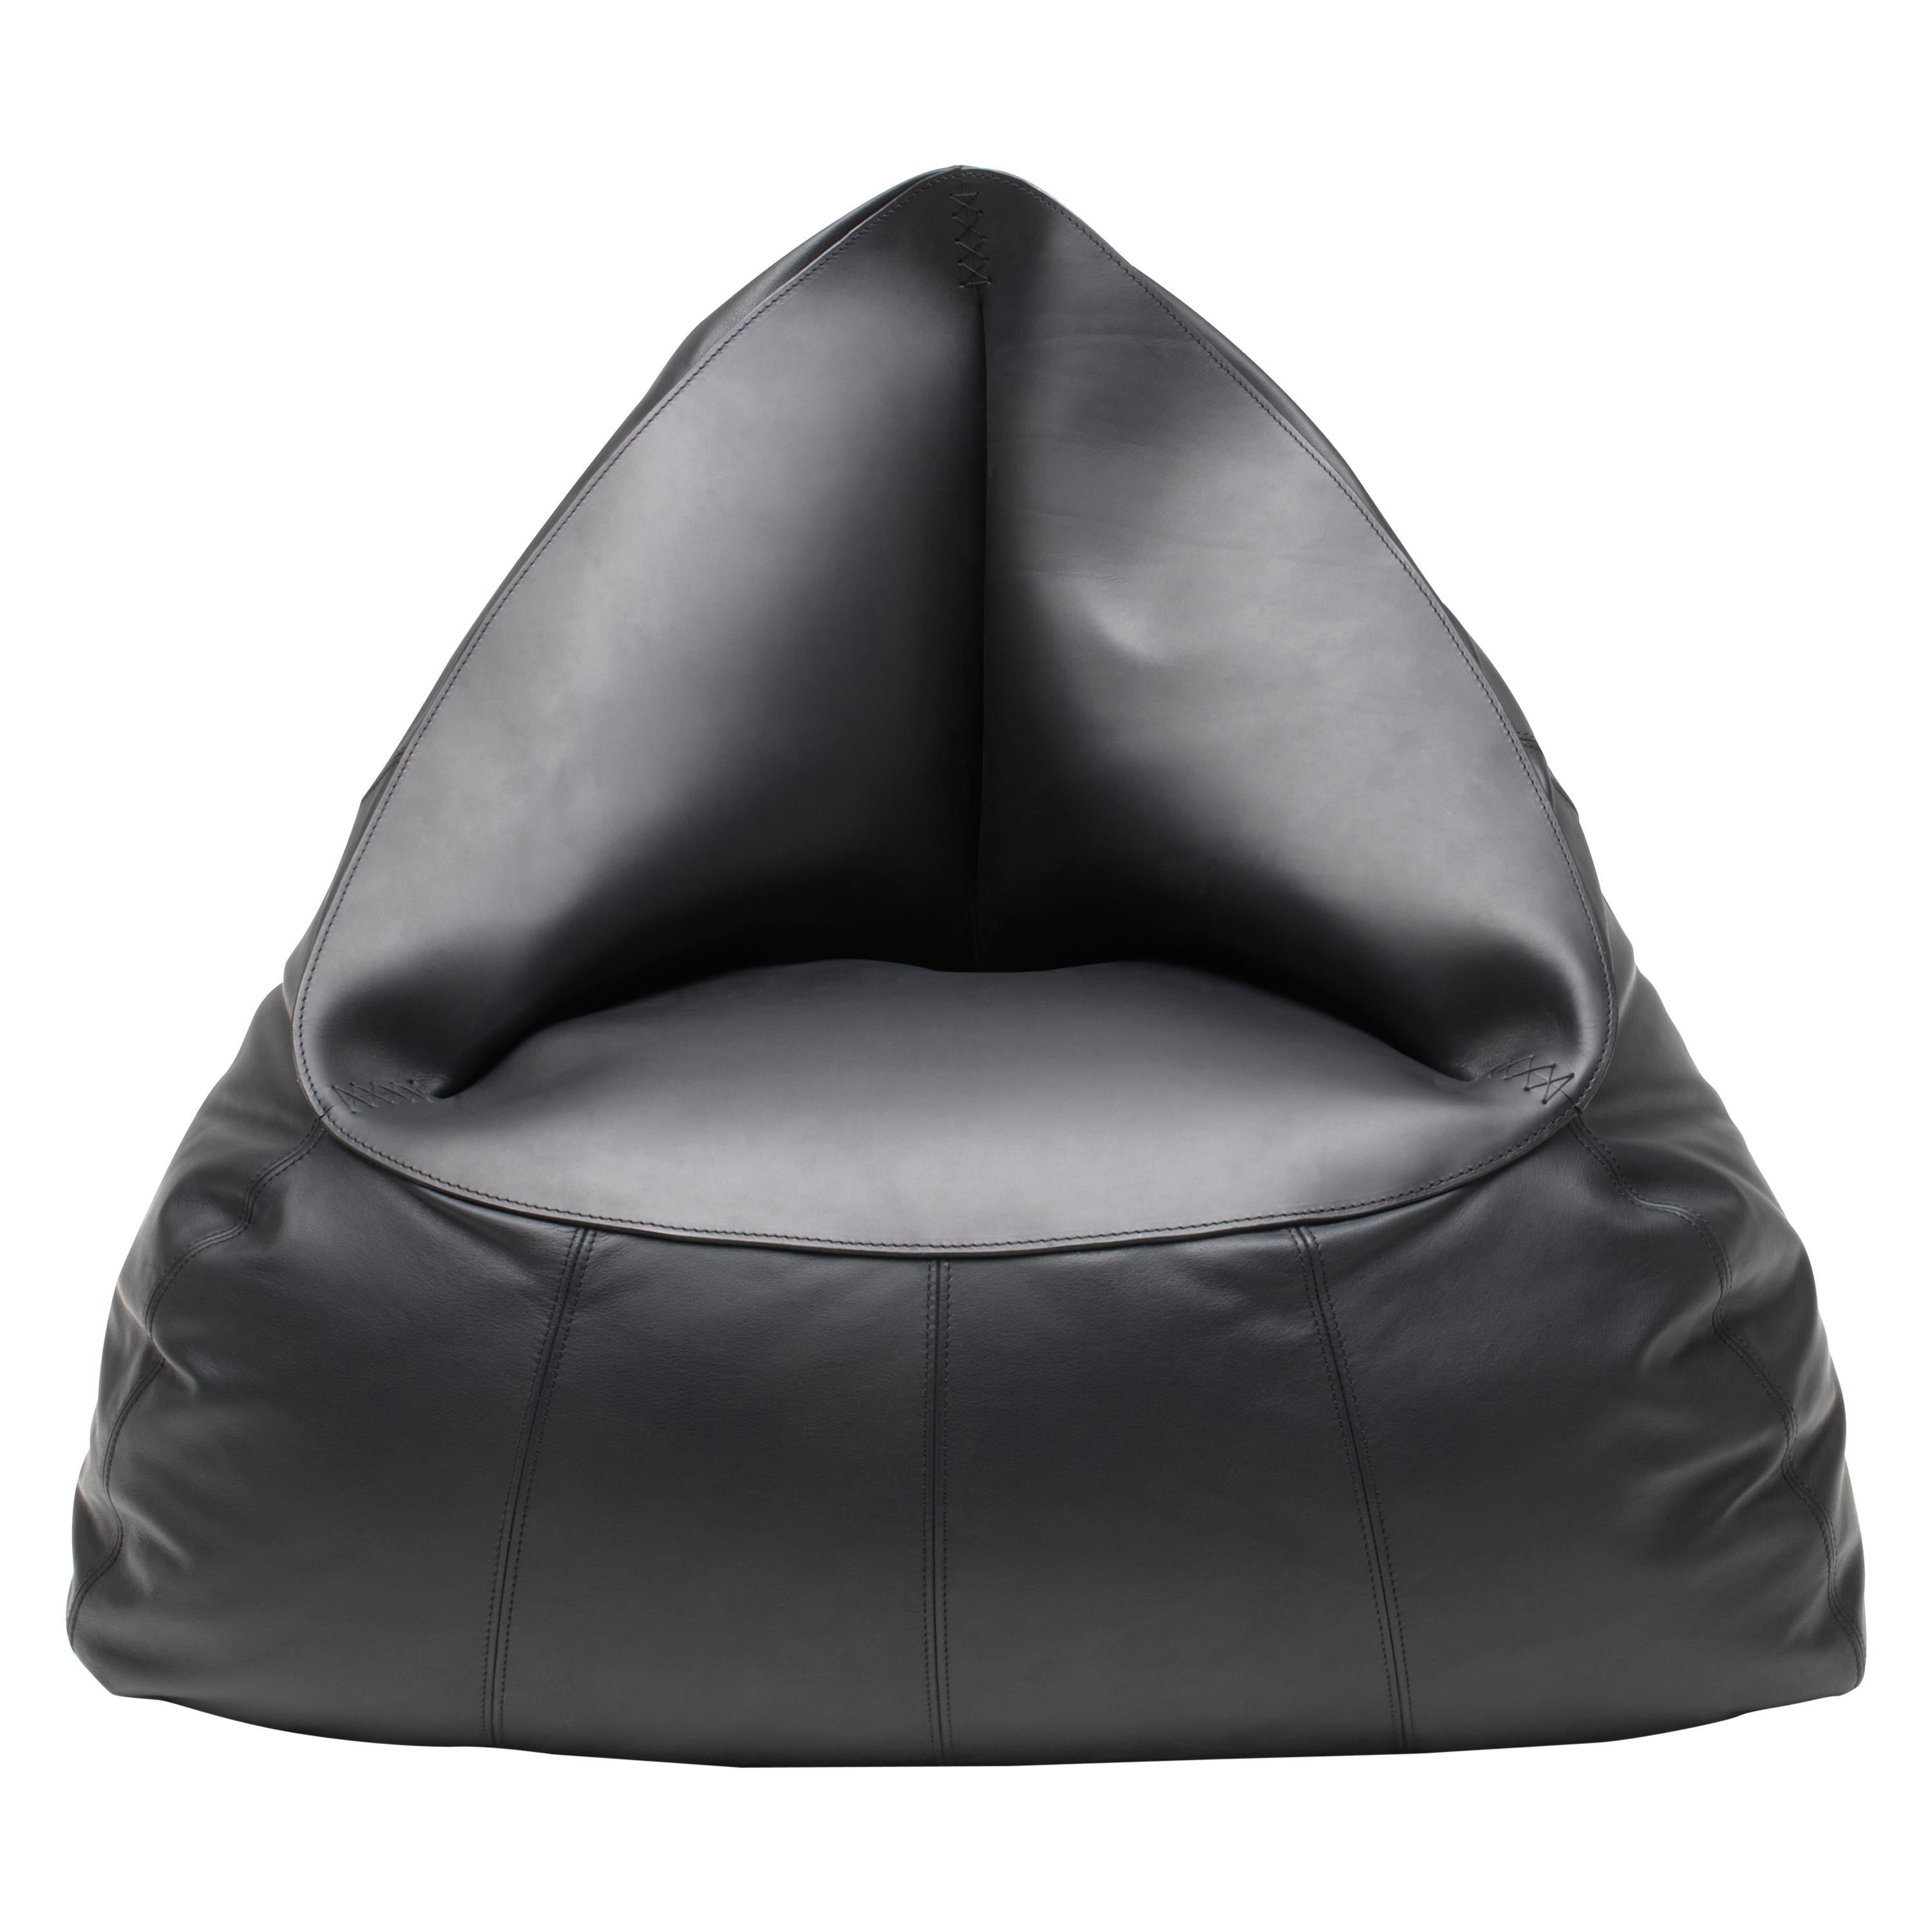 DS-9090 Handstitched Leather Beanbag Chair by De Sede